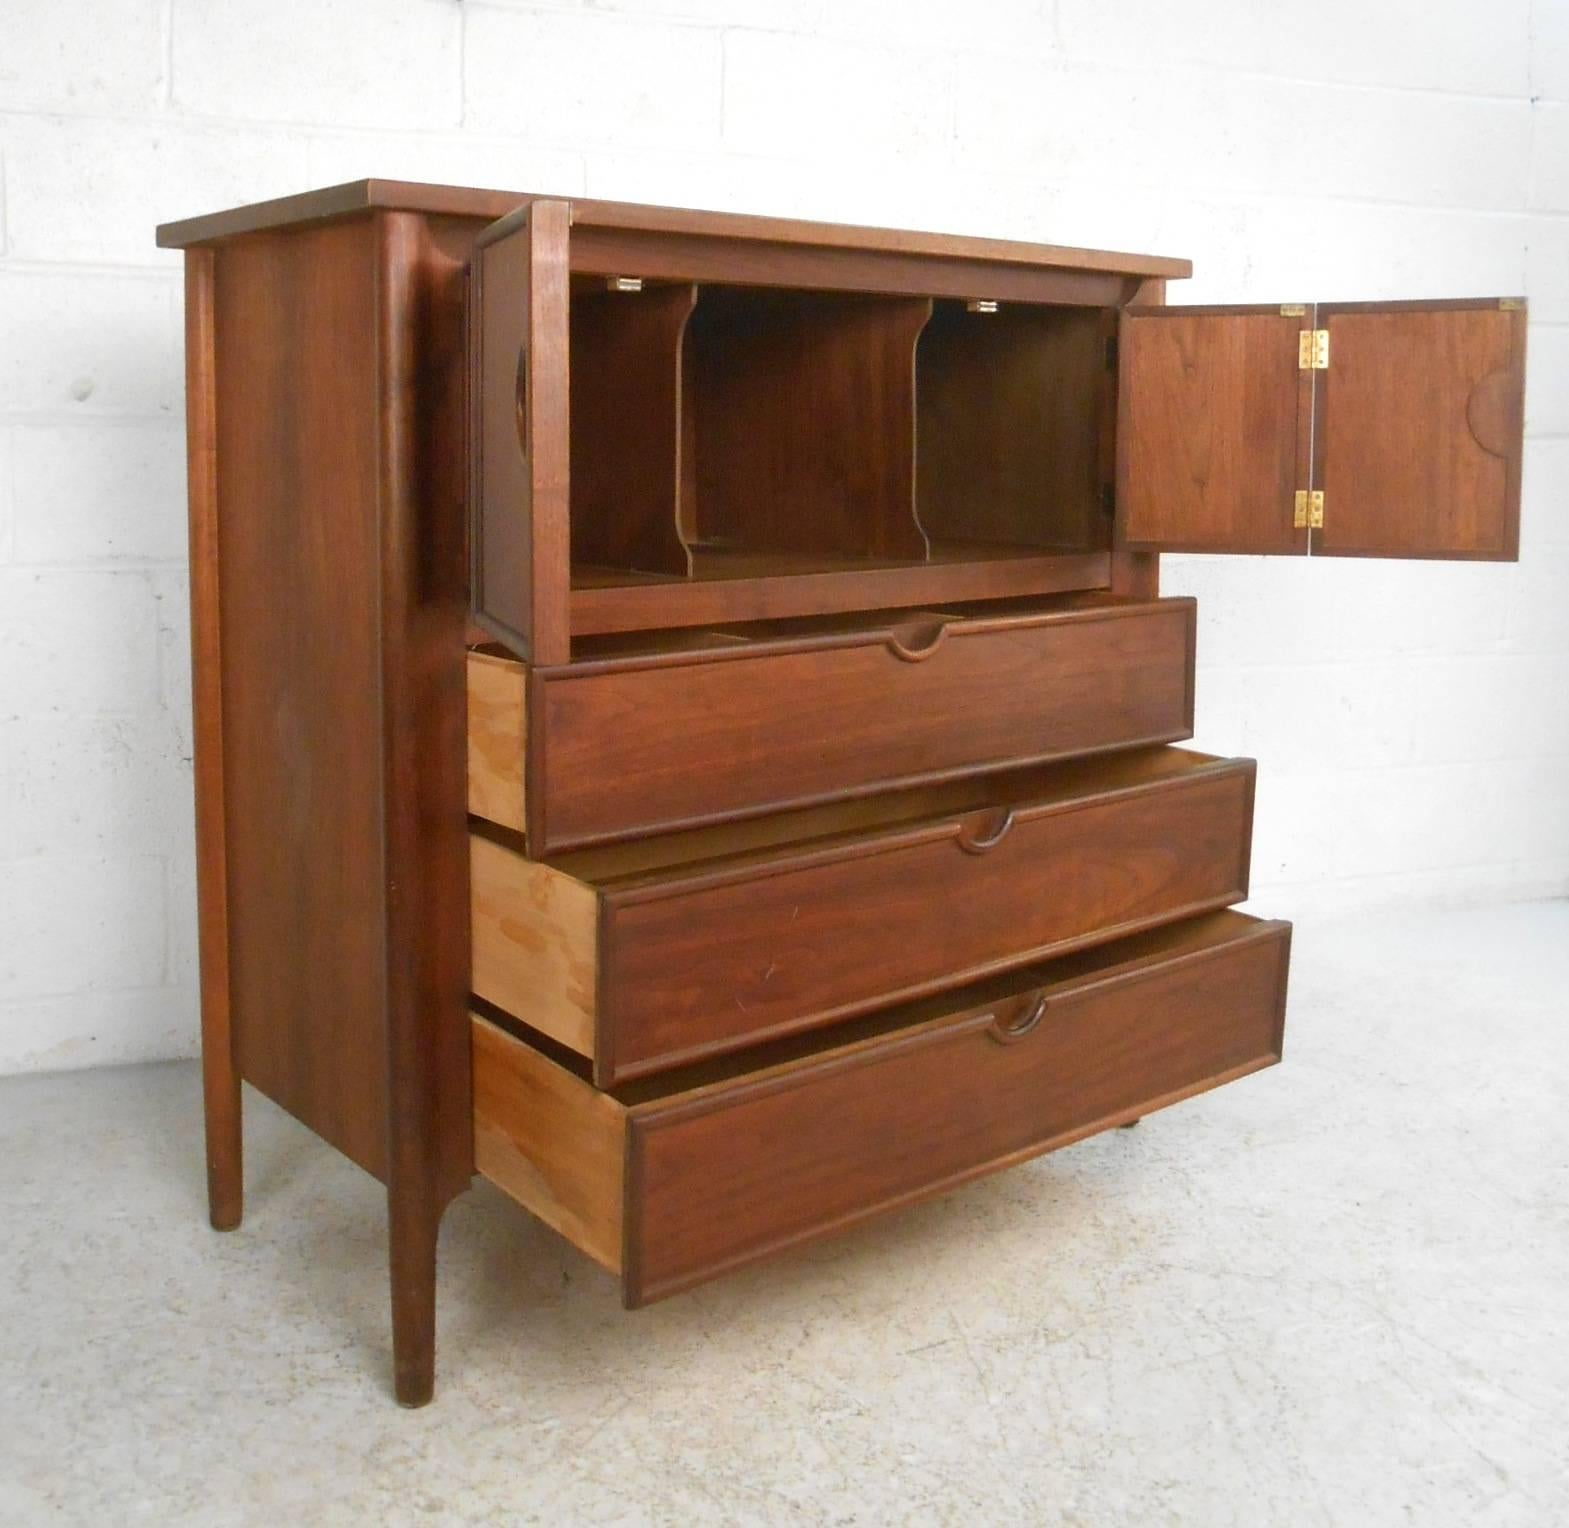 Beautiful vintage modern chest with a large compartment with spacers hidden by two cabinet doors and three hefty drawers. Stylish design has unusual recessed ellipse cut-out pulls on each cabinet and drawer. This solid walnut Mid-Century case piece